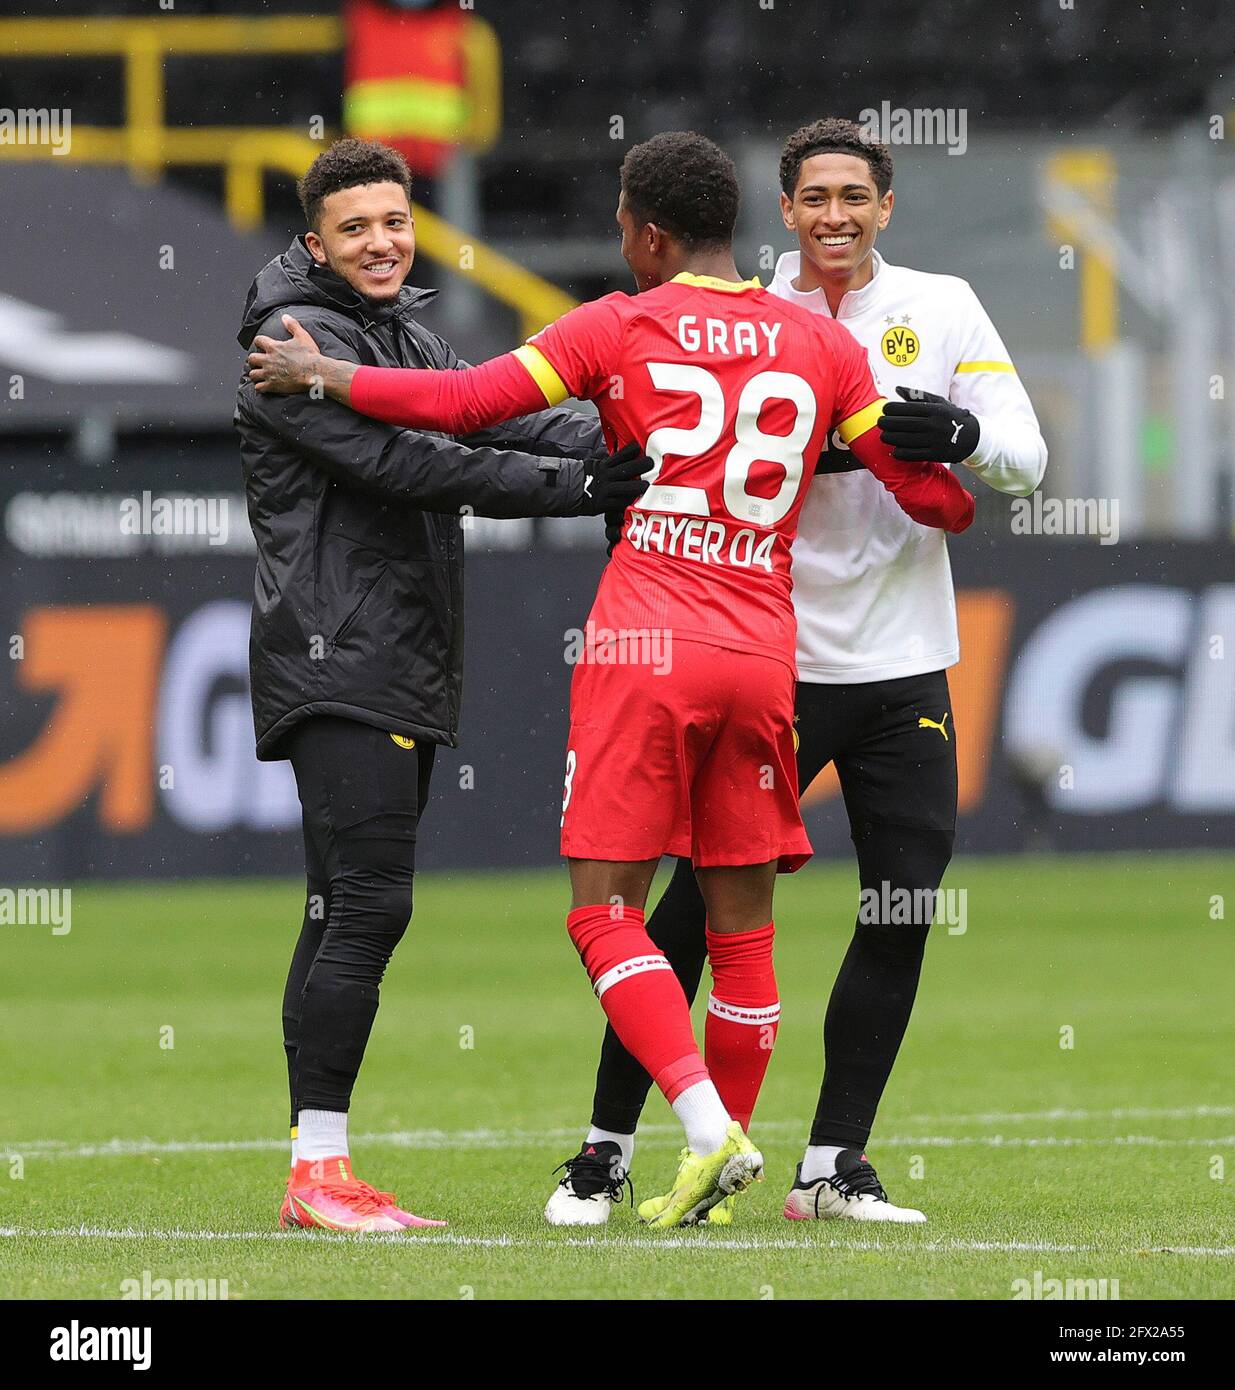 left to right Jadon SANCHO (DO), Demarai GRAY (LEV), Jude BELLINGHAM (DO) Soccer 1. Bundesliga, 34th matchday, Borussia Dortmund (DO) - Bayer 04 Leverkusen (LEV) 3: 1, on May 22, 2021 in Dortmund / Germany. Photo: Ralf Ibing / firo Sportphoto / Pool via Fotoagentur Sven Simon # DFL regulations prohibit any use of photographs as image sequences and / or quasi-video # Editorial Use ONLY # National and International News Agencies OUT ¬ Stock Photo